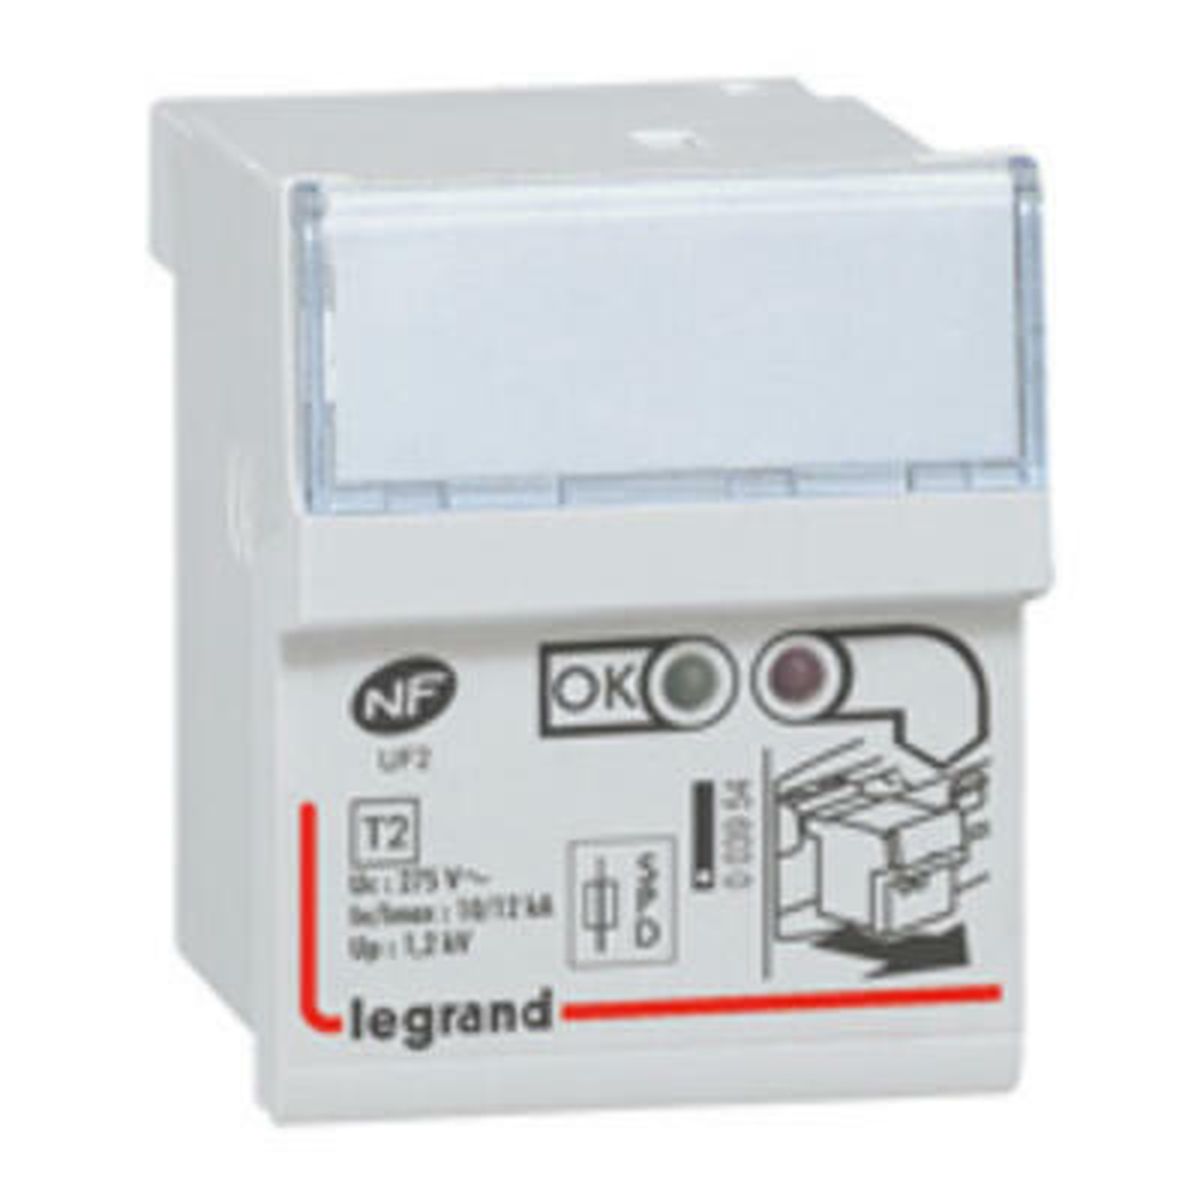 003954 - Replacement cassette for mains surge protector - 003954 - Legrand - 0